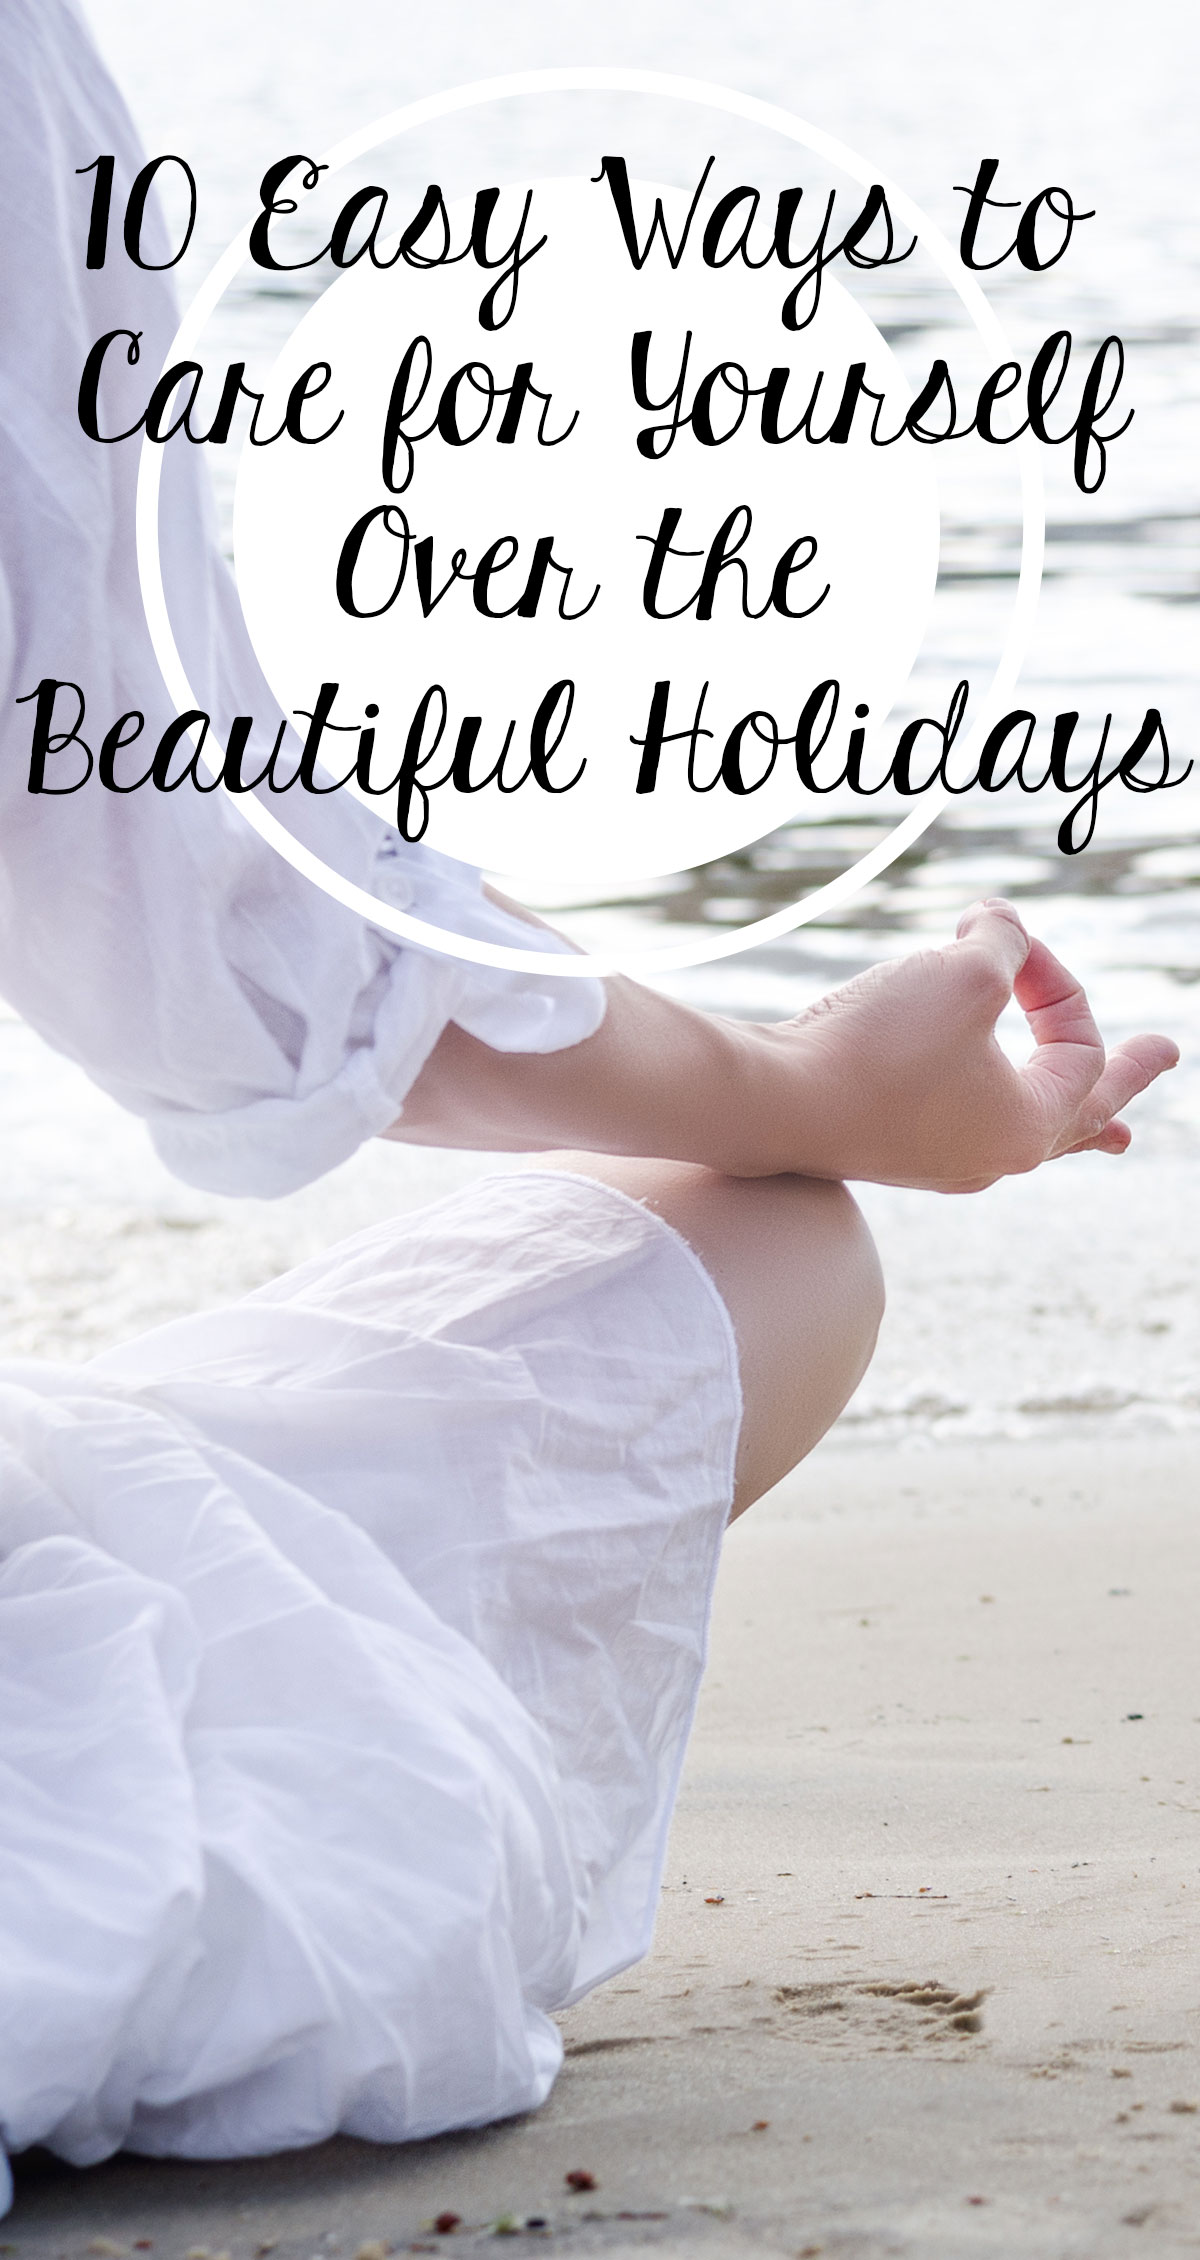 10 Easy Ways To Care for Yourself Over The Beautiful Holidays Pin